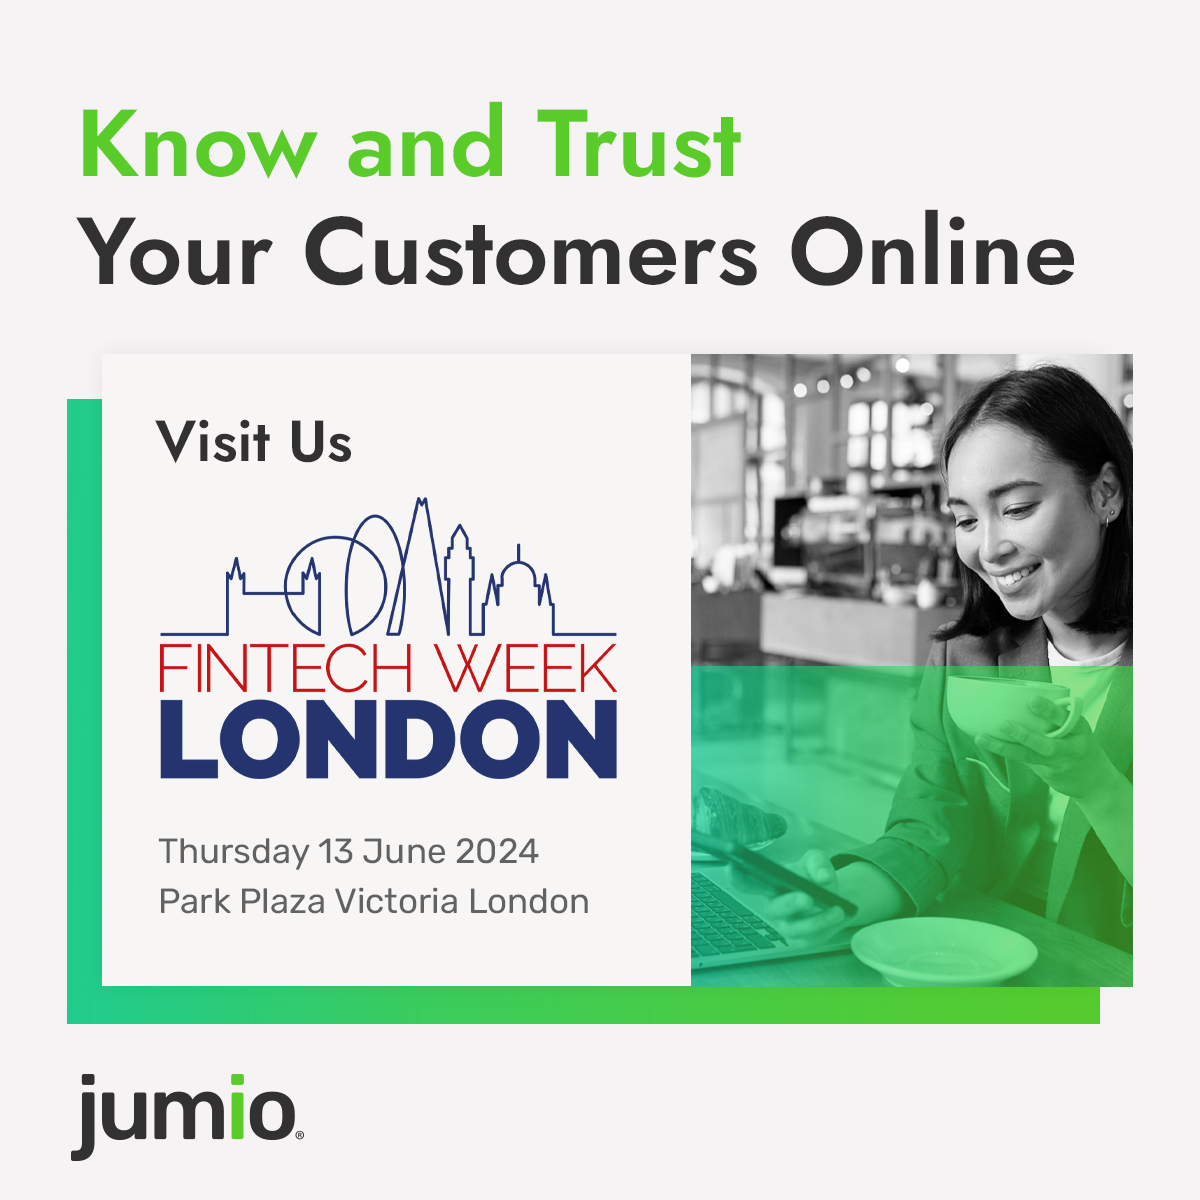 Jumio’s AI-driven identity verification platform helps leading banks and fintechs know and trust their customers online. Come see us at @FintechWeekLDN to learn more: fintechweek.london/event/ee96db61…